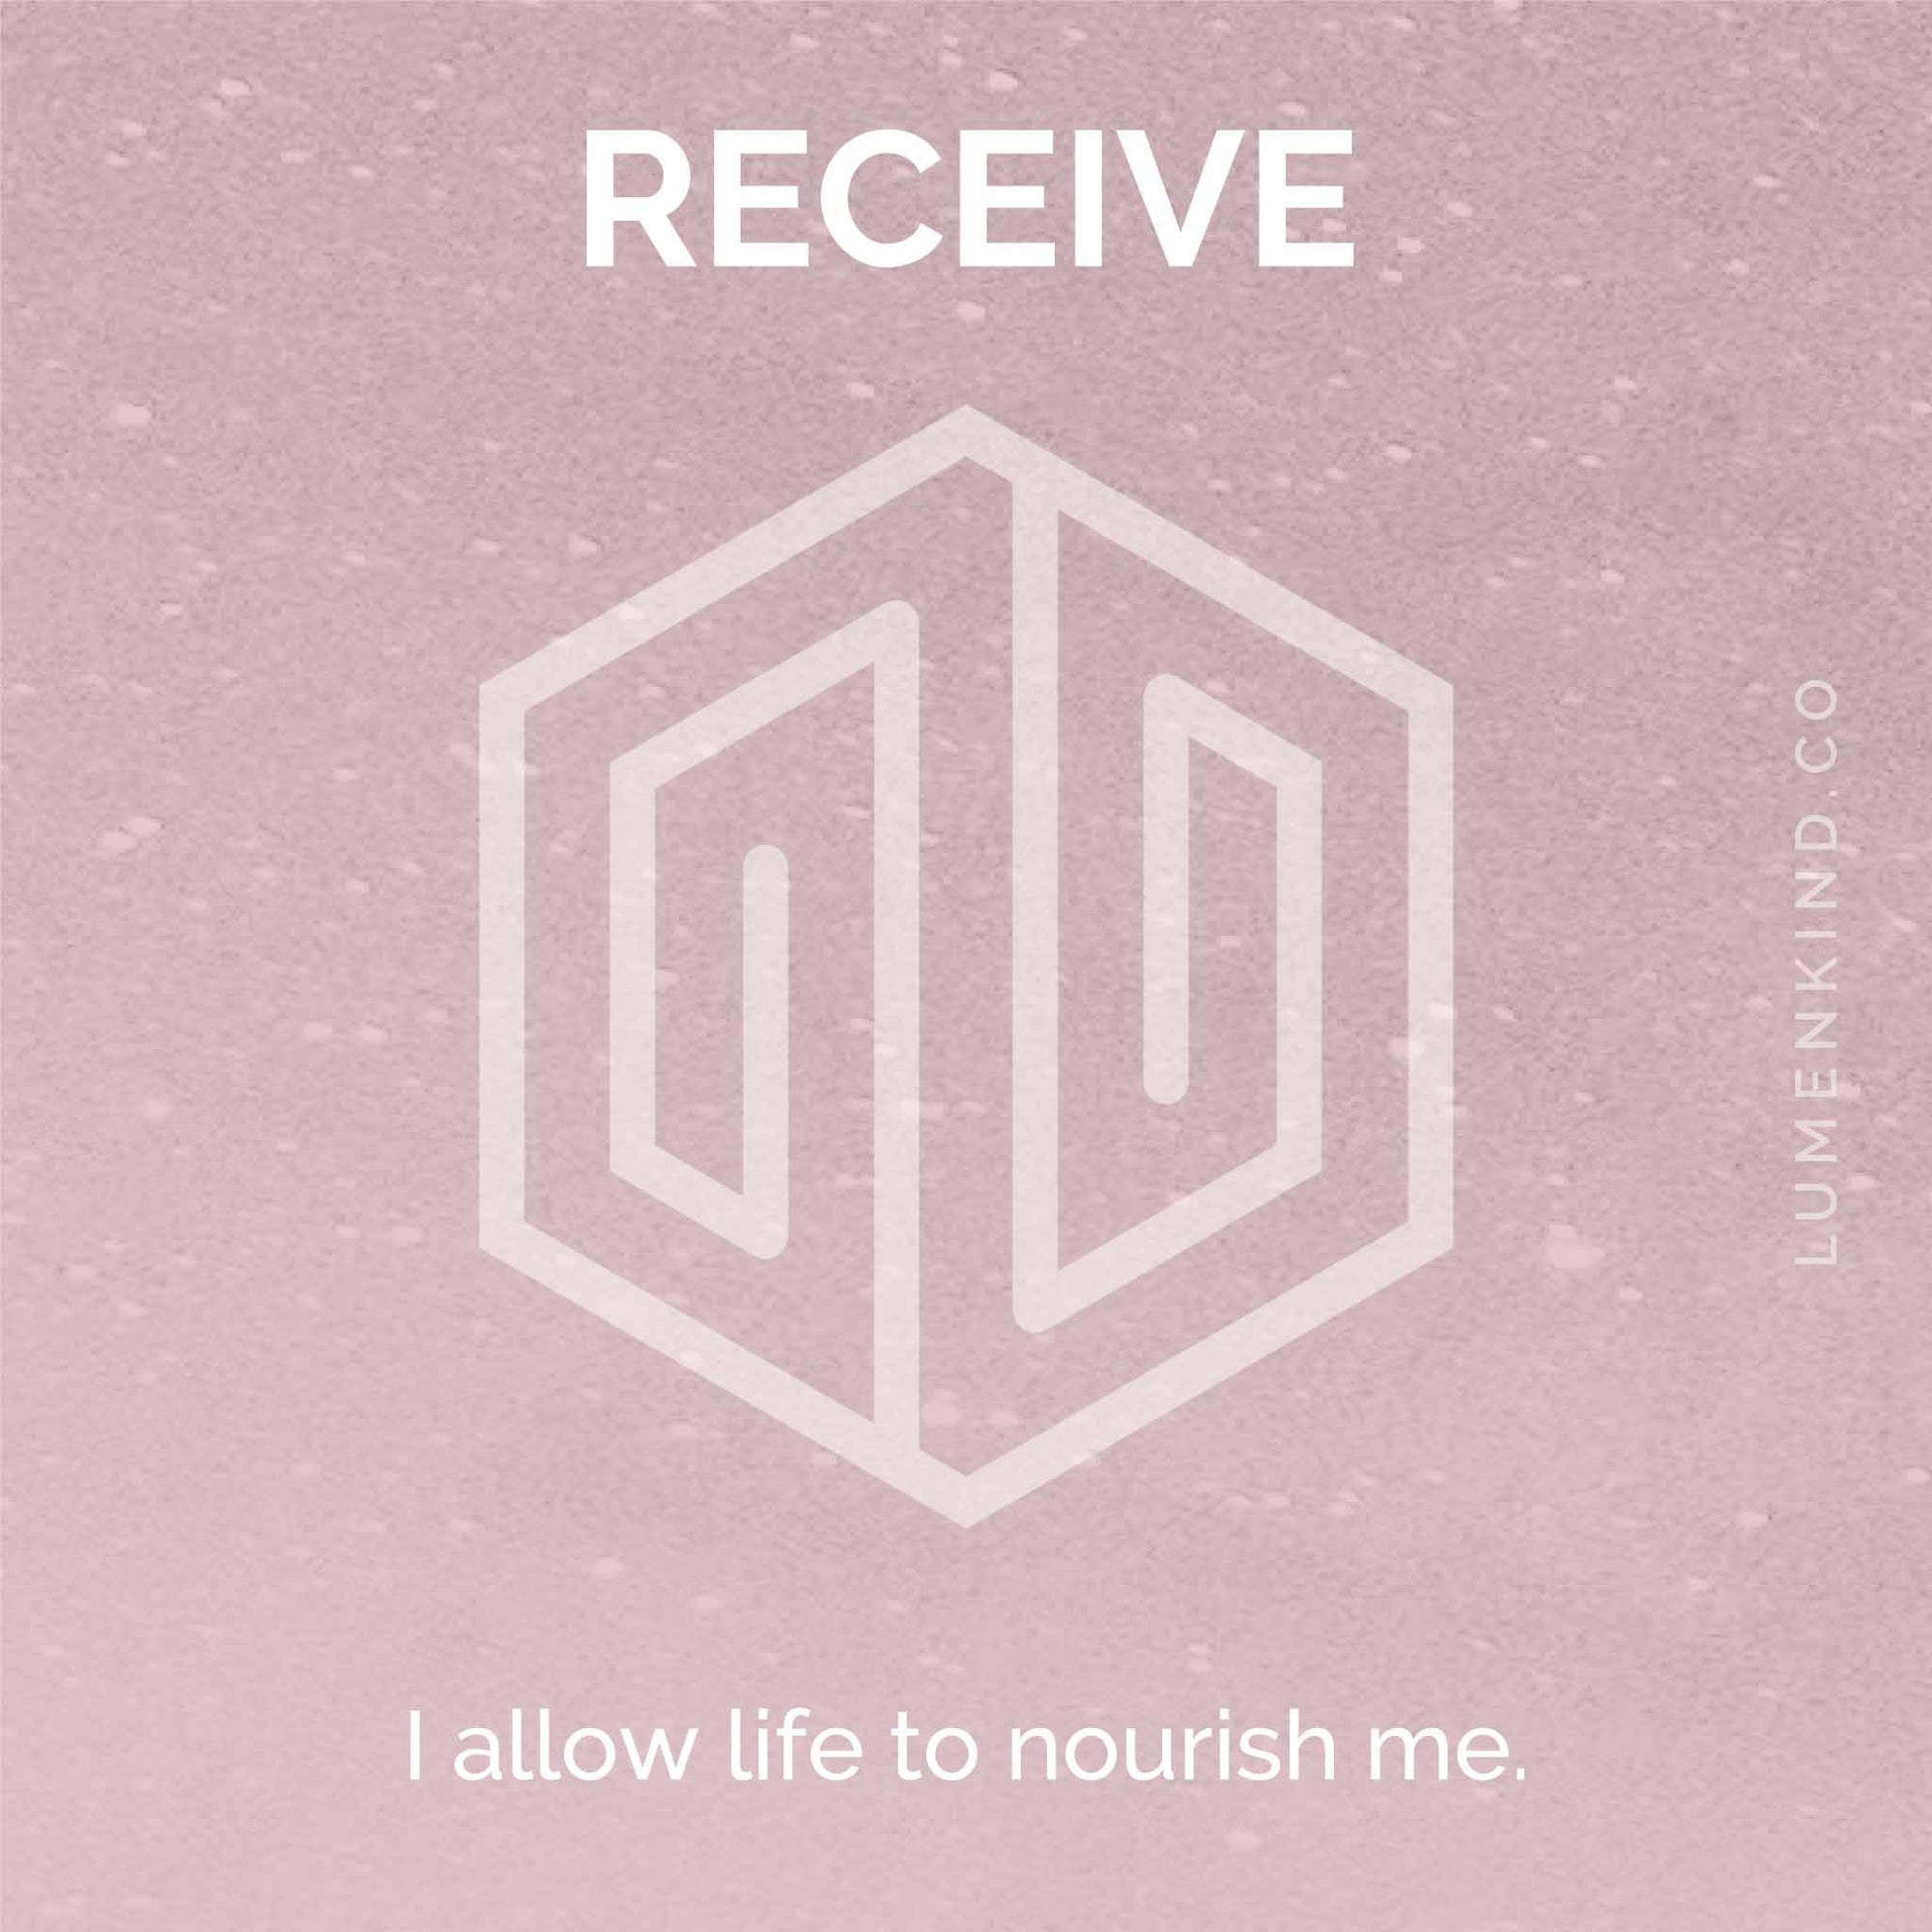 The suggested intention is RECEIVE. I allow life to nourish me.